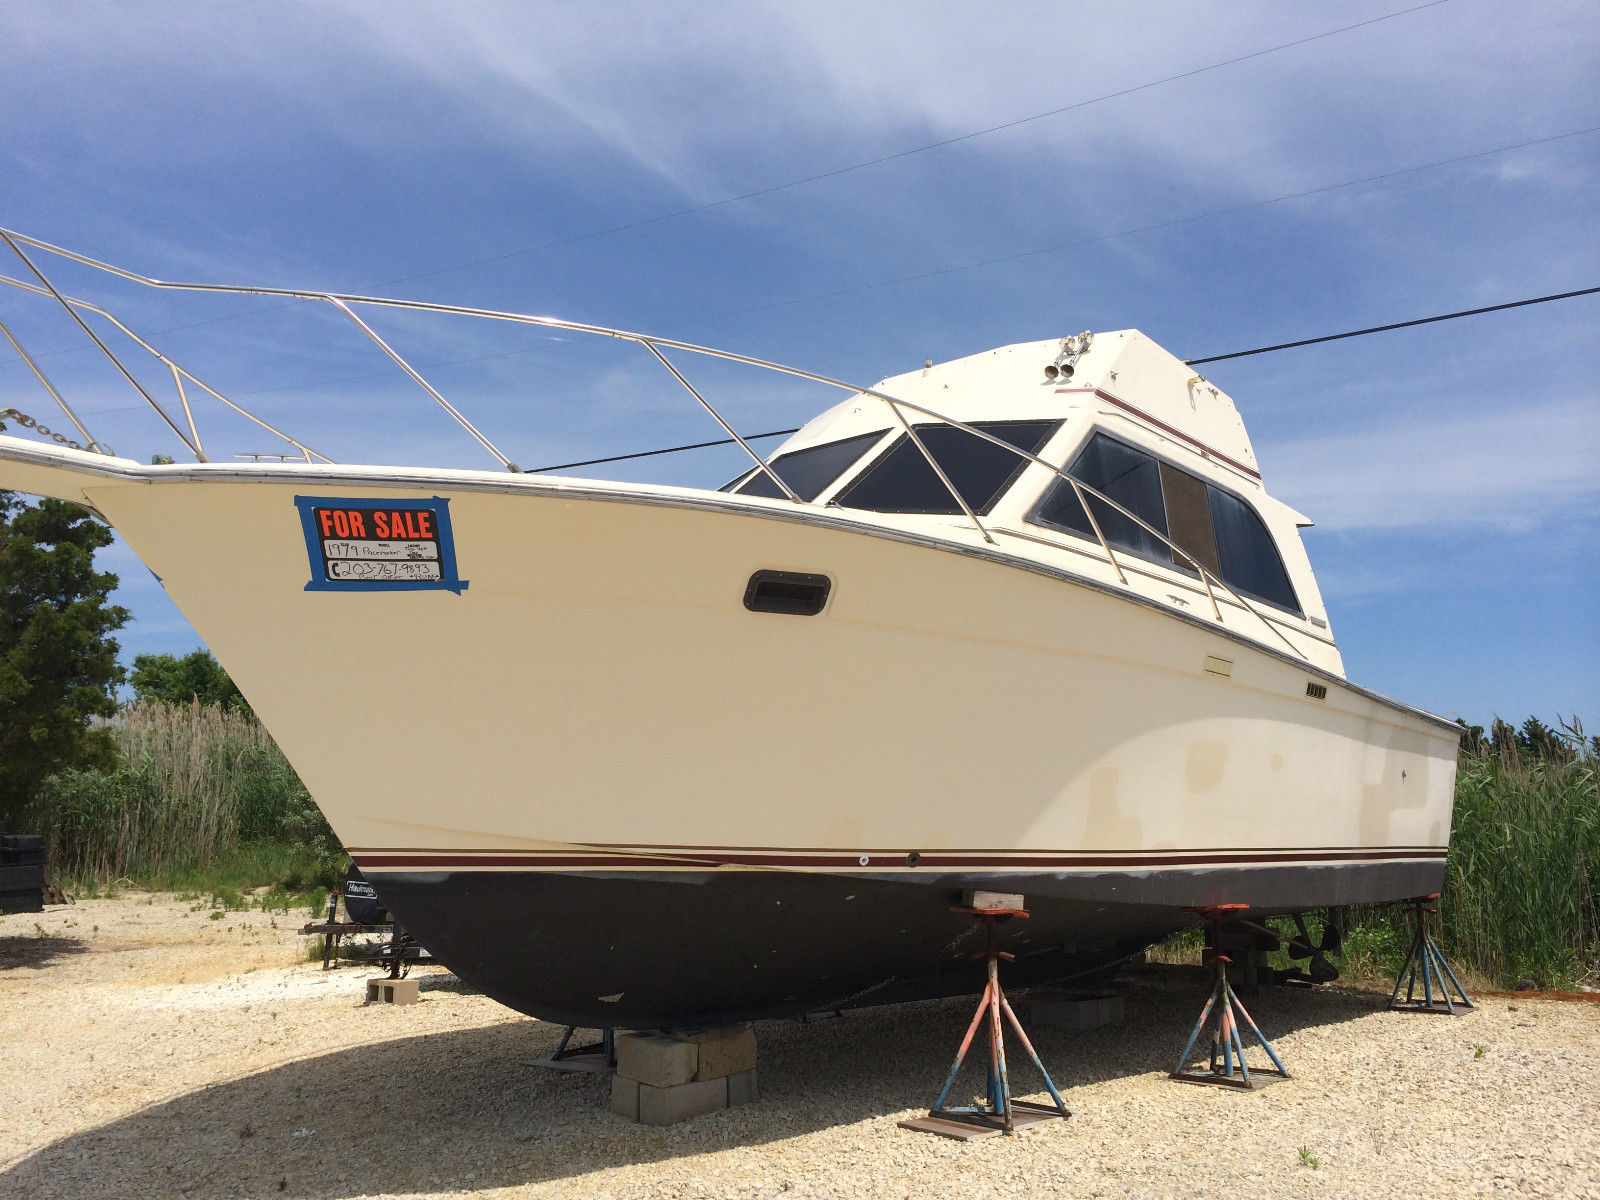 pacemaker 33' sportfish 1979 for sale for $10,000 - boats